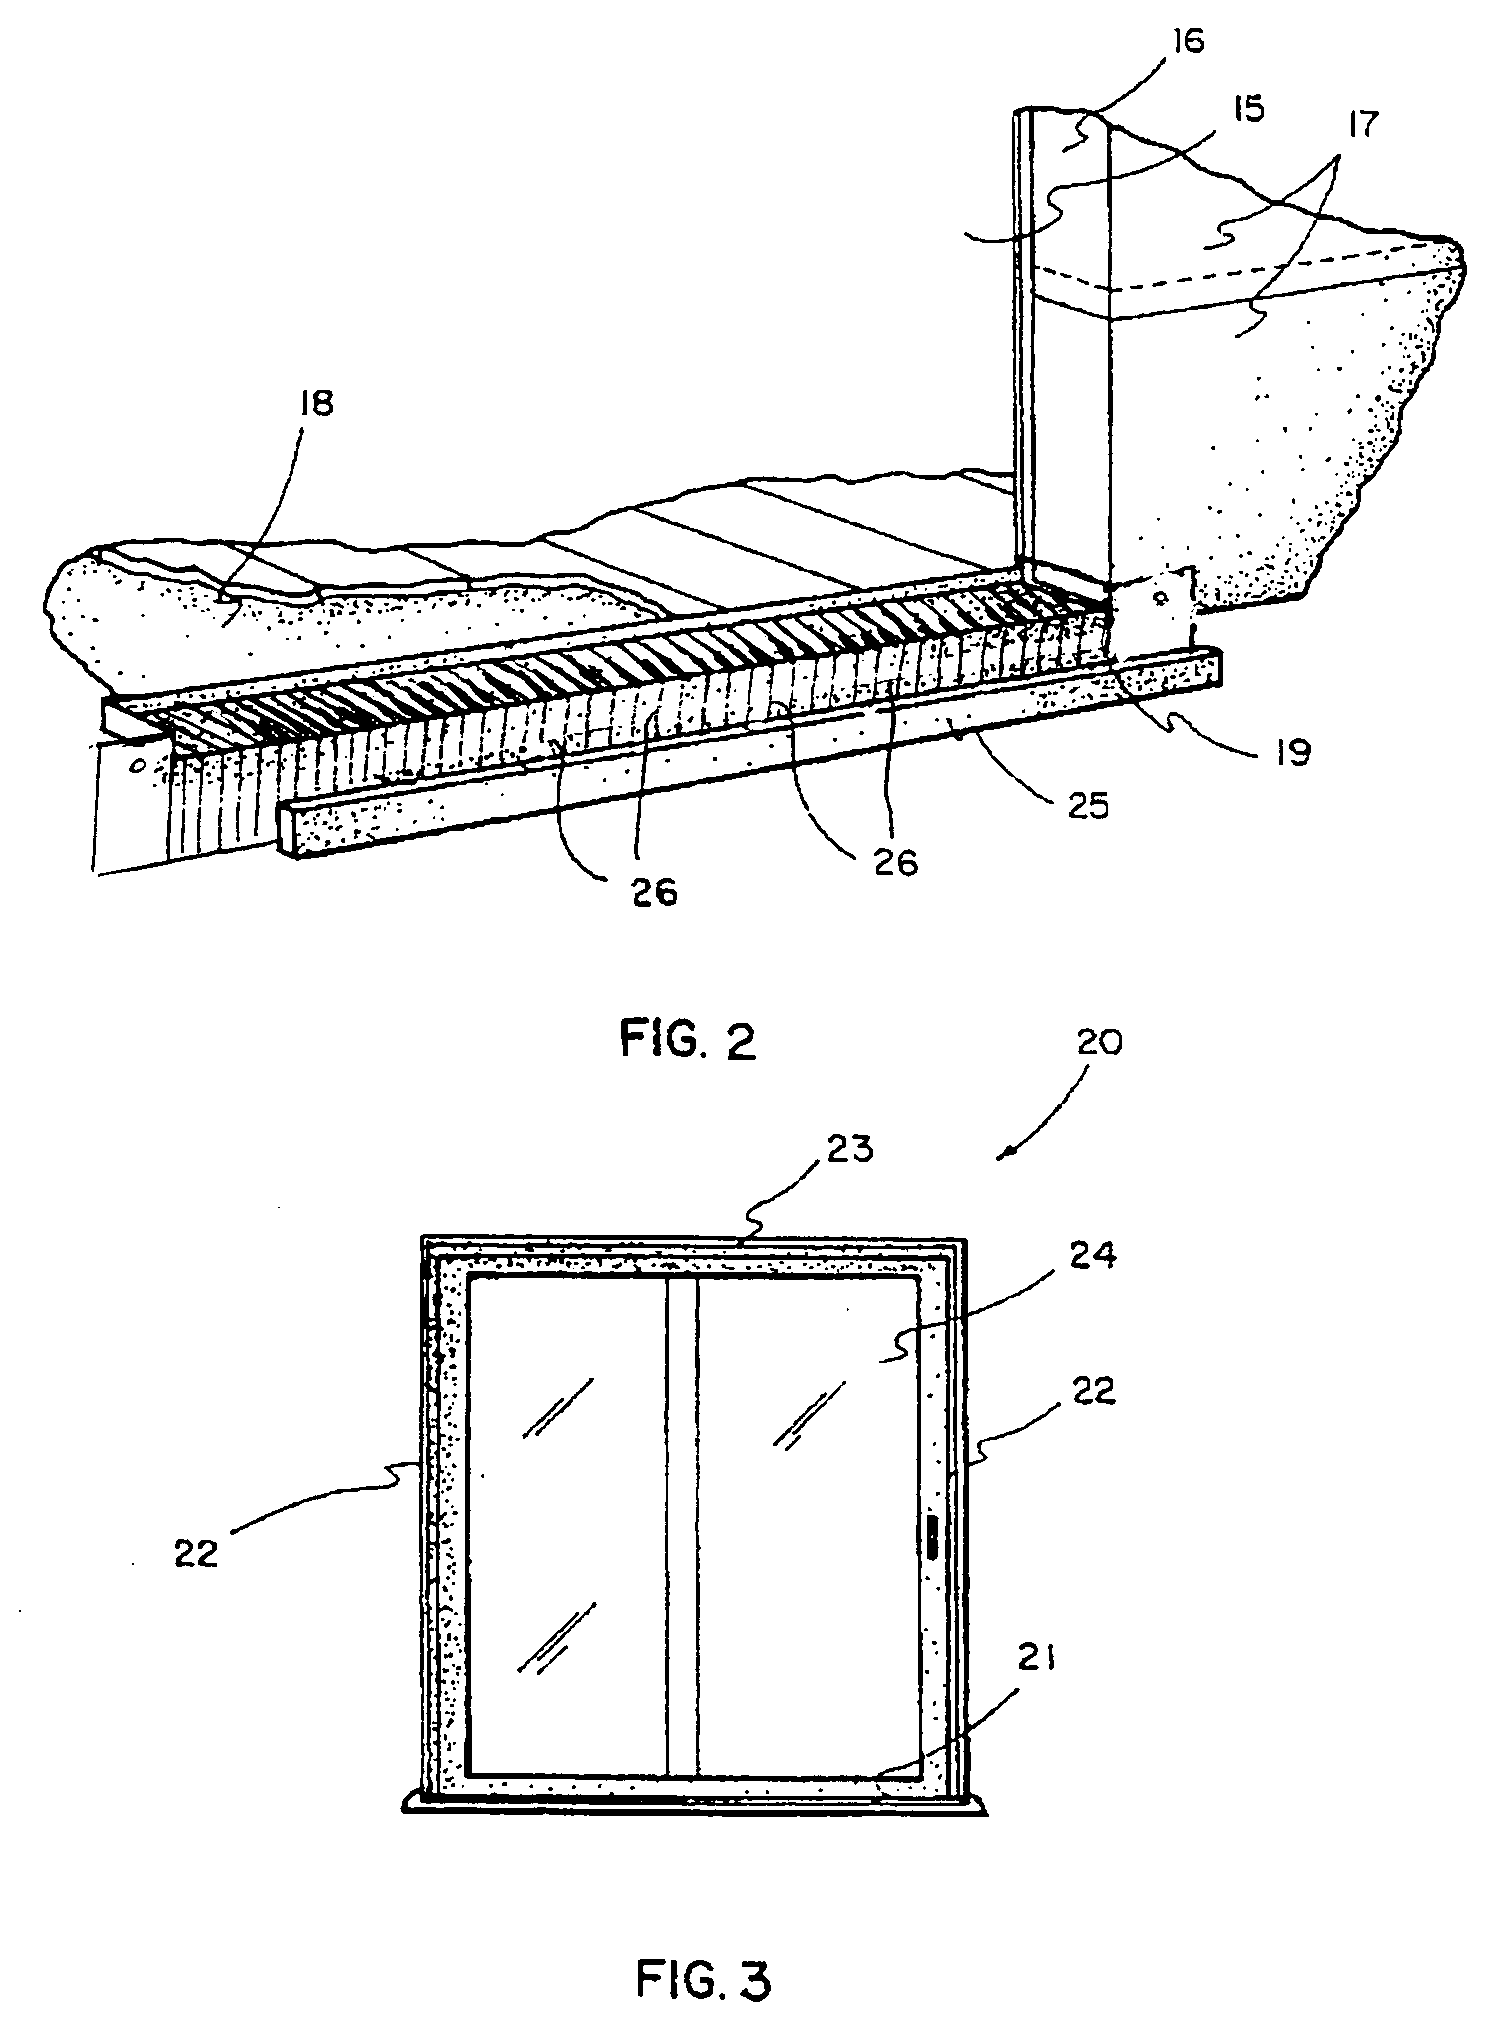 Method and apparatus for wall component drainage